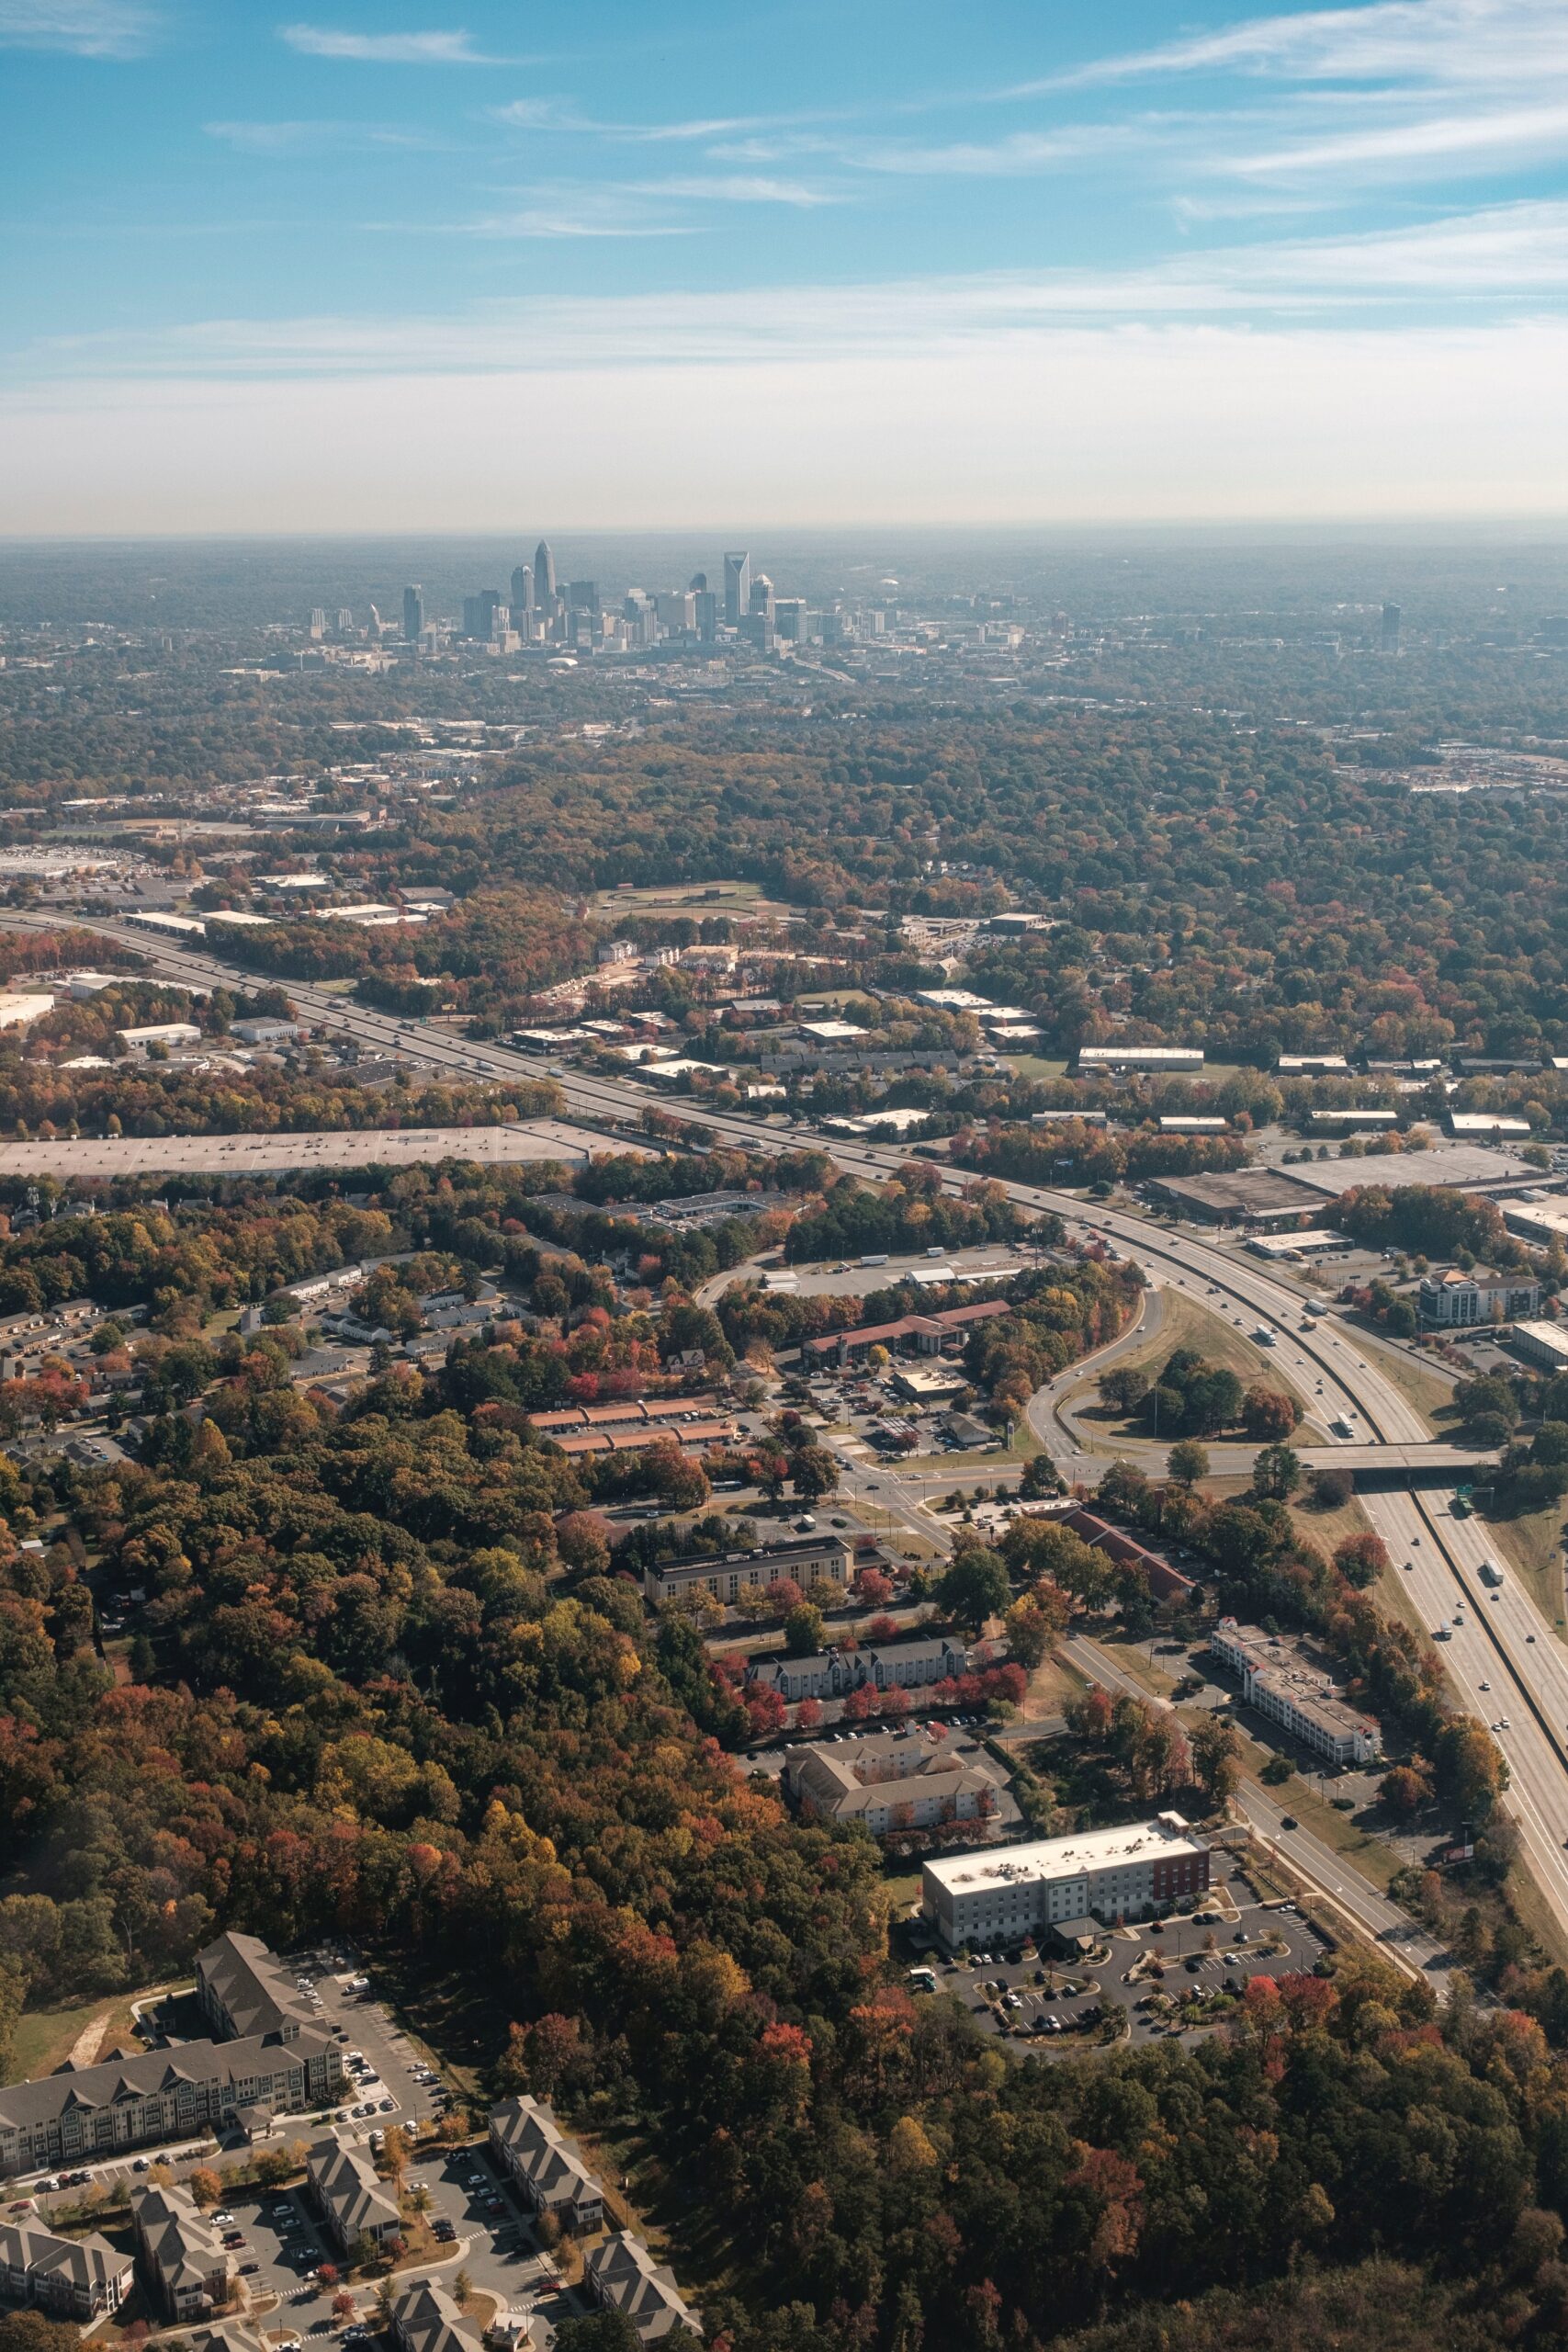 drone photography of Charlotte, NC, USA with industrial and suburban terrain in the foreground and the uptown city epicenter in the distance